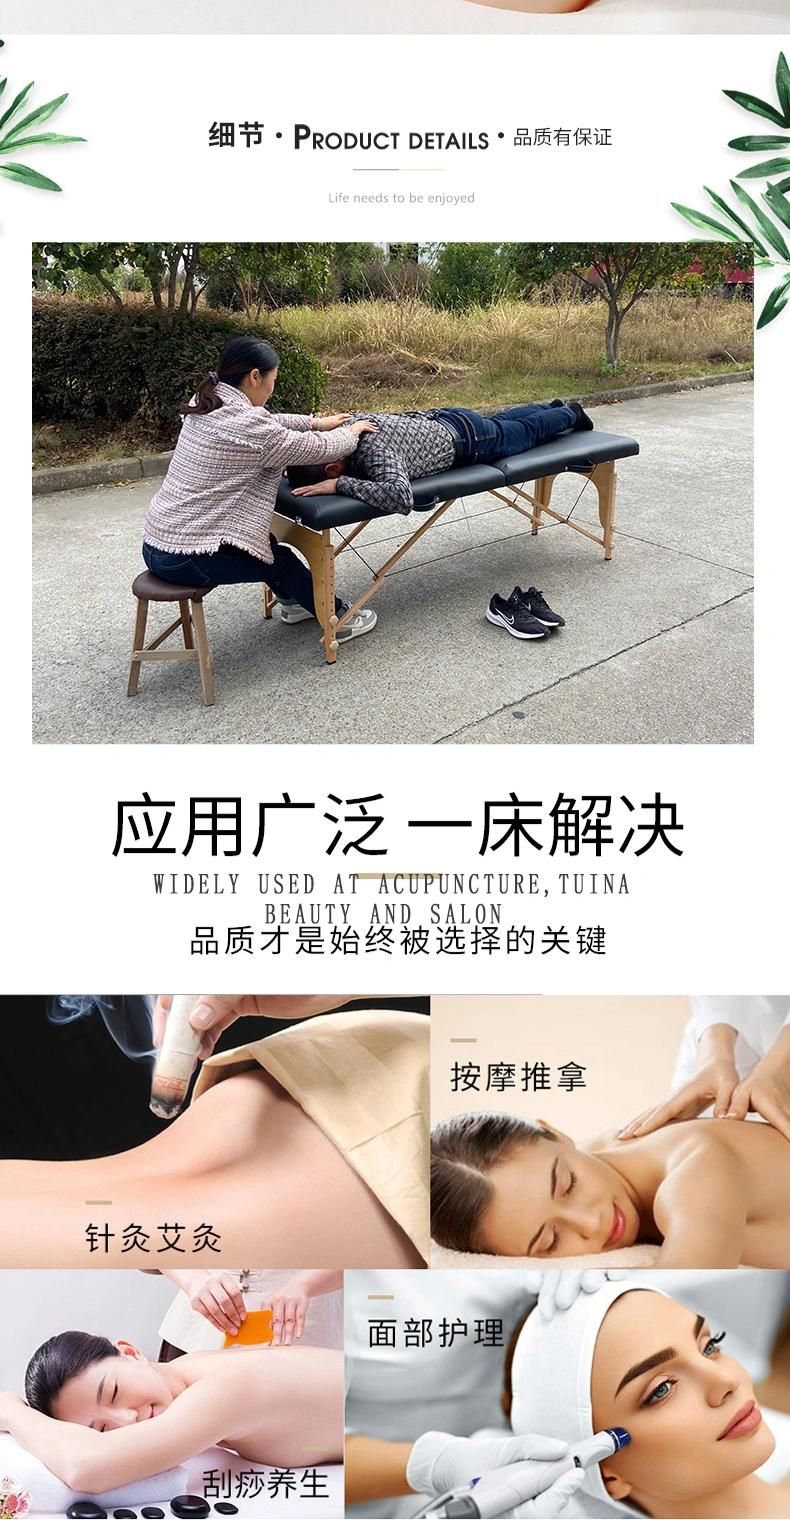 Beauty Wooden Folding Massage Table Facial Bed Portable Couch SPA